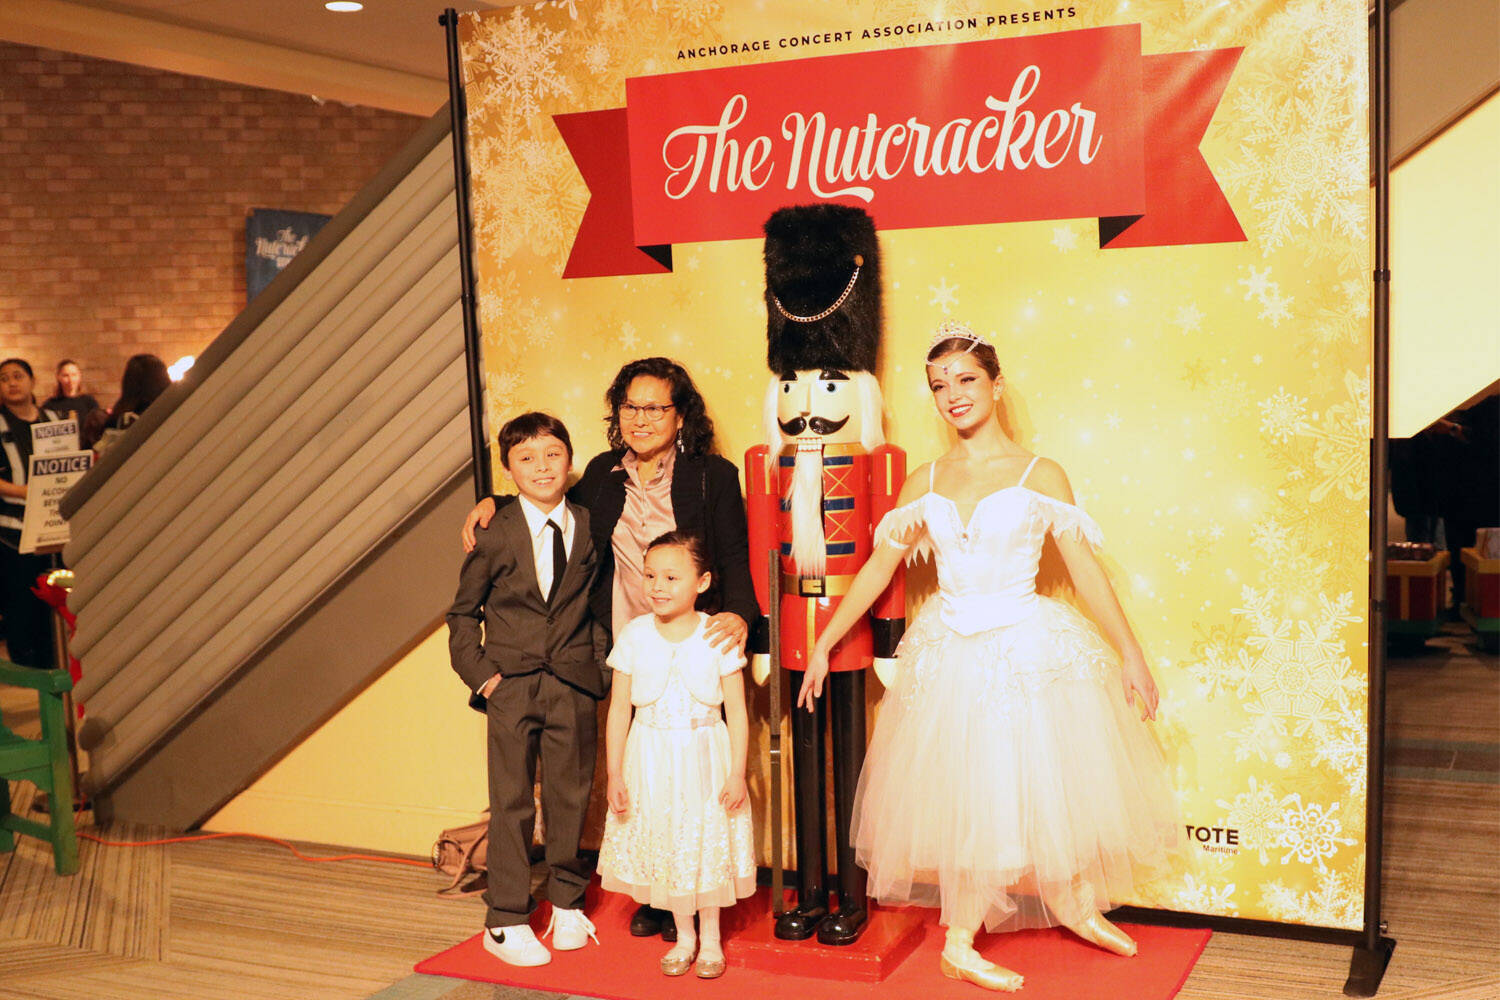 Sara DeVolld, right, stands for photos with attendees of “The Nutcracker” with Eugene Ballet at the Alaska Center for the Performing Arts in Anchorage, Alaska. (Photo courtesy Shona DeVolld)